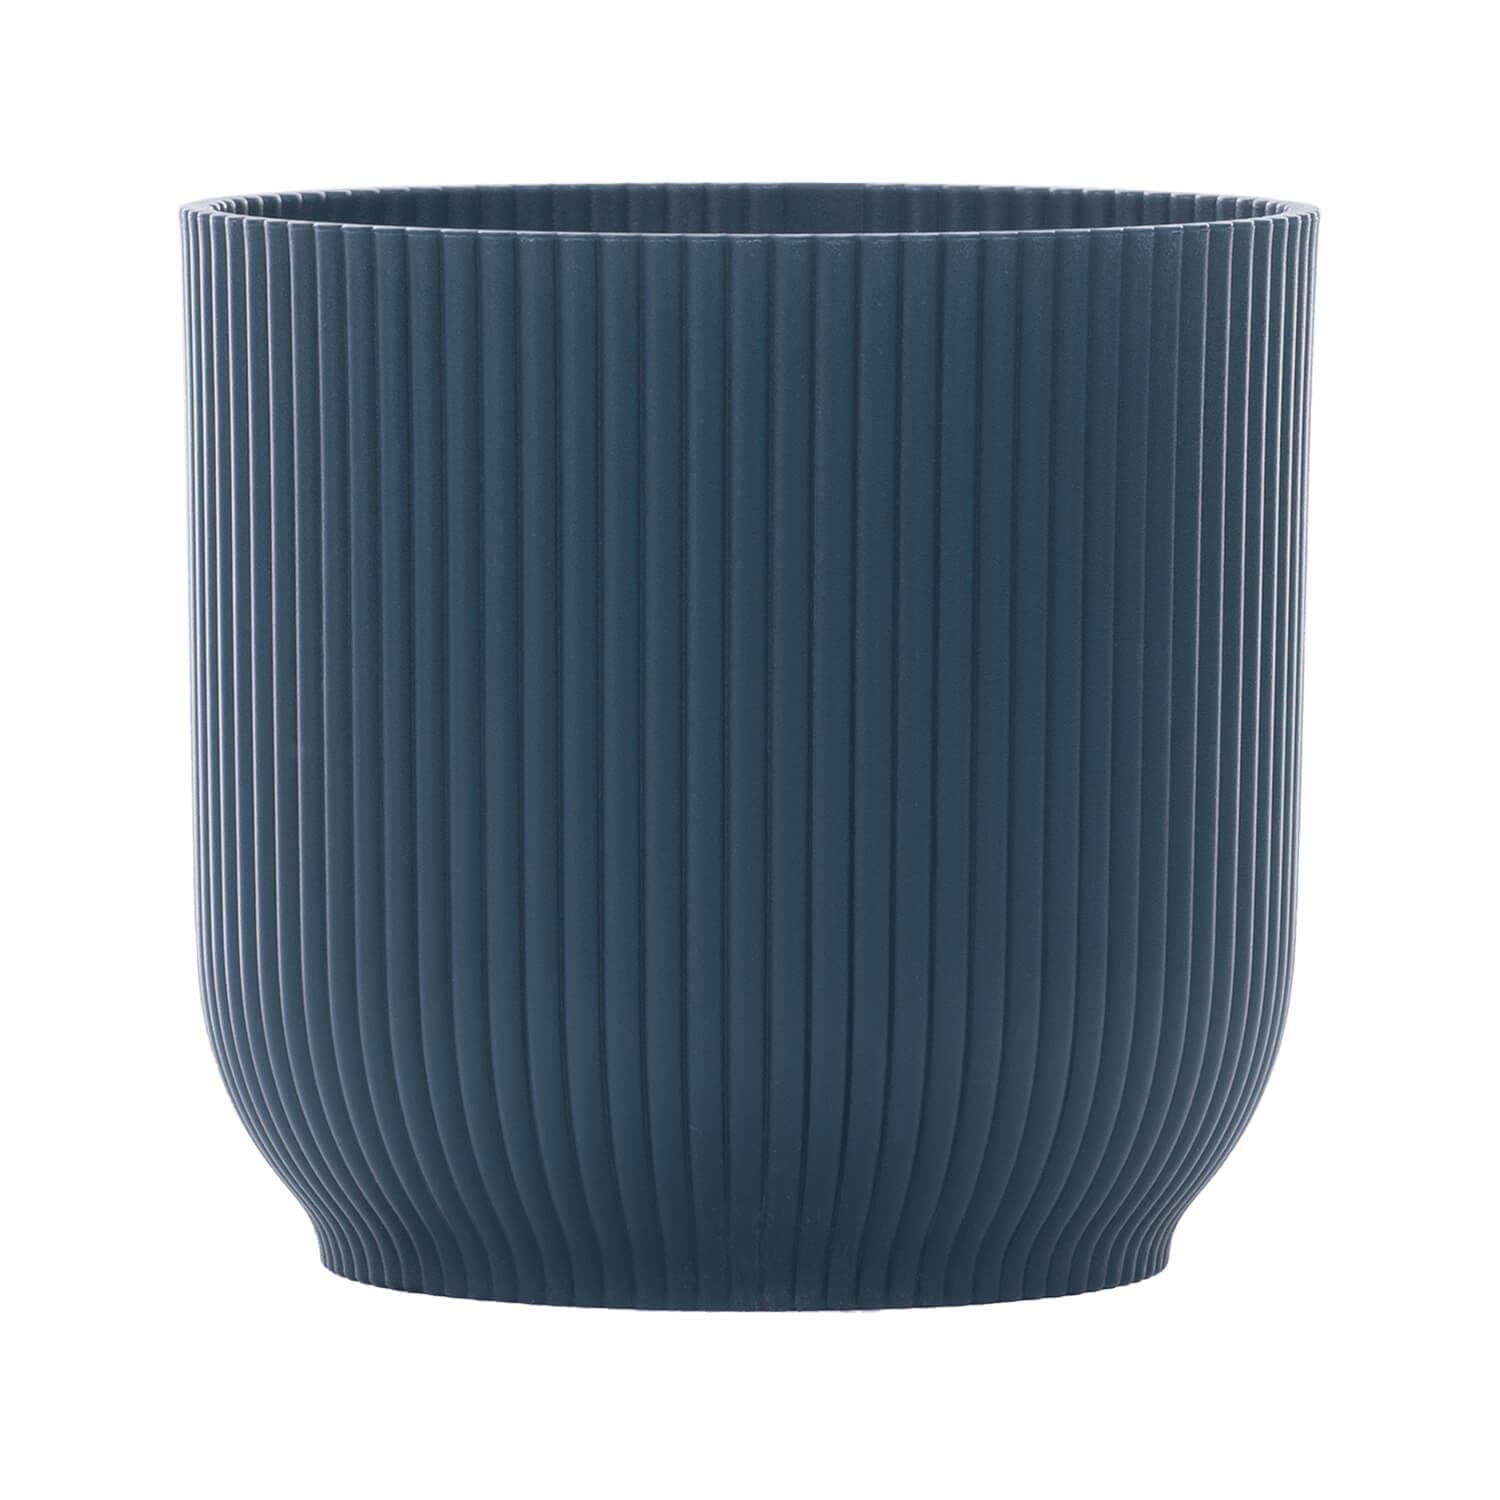 Ash Recycled Plant Pot in Blue